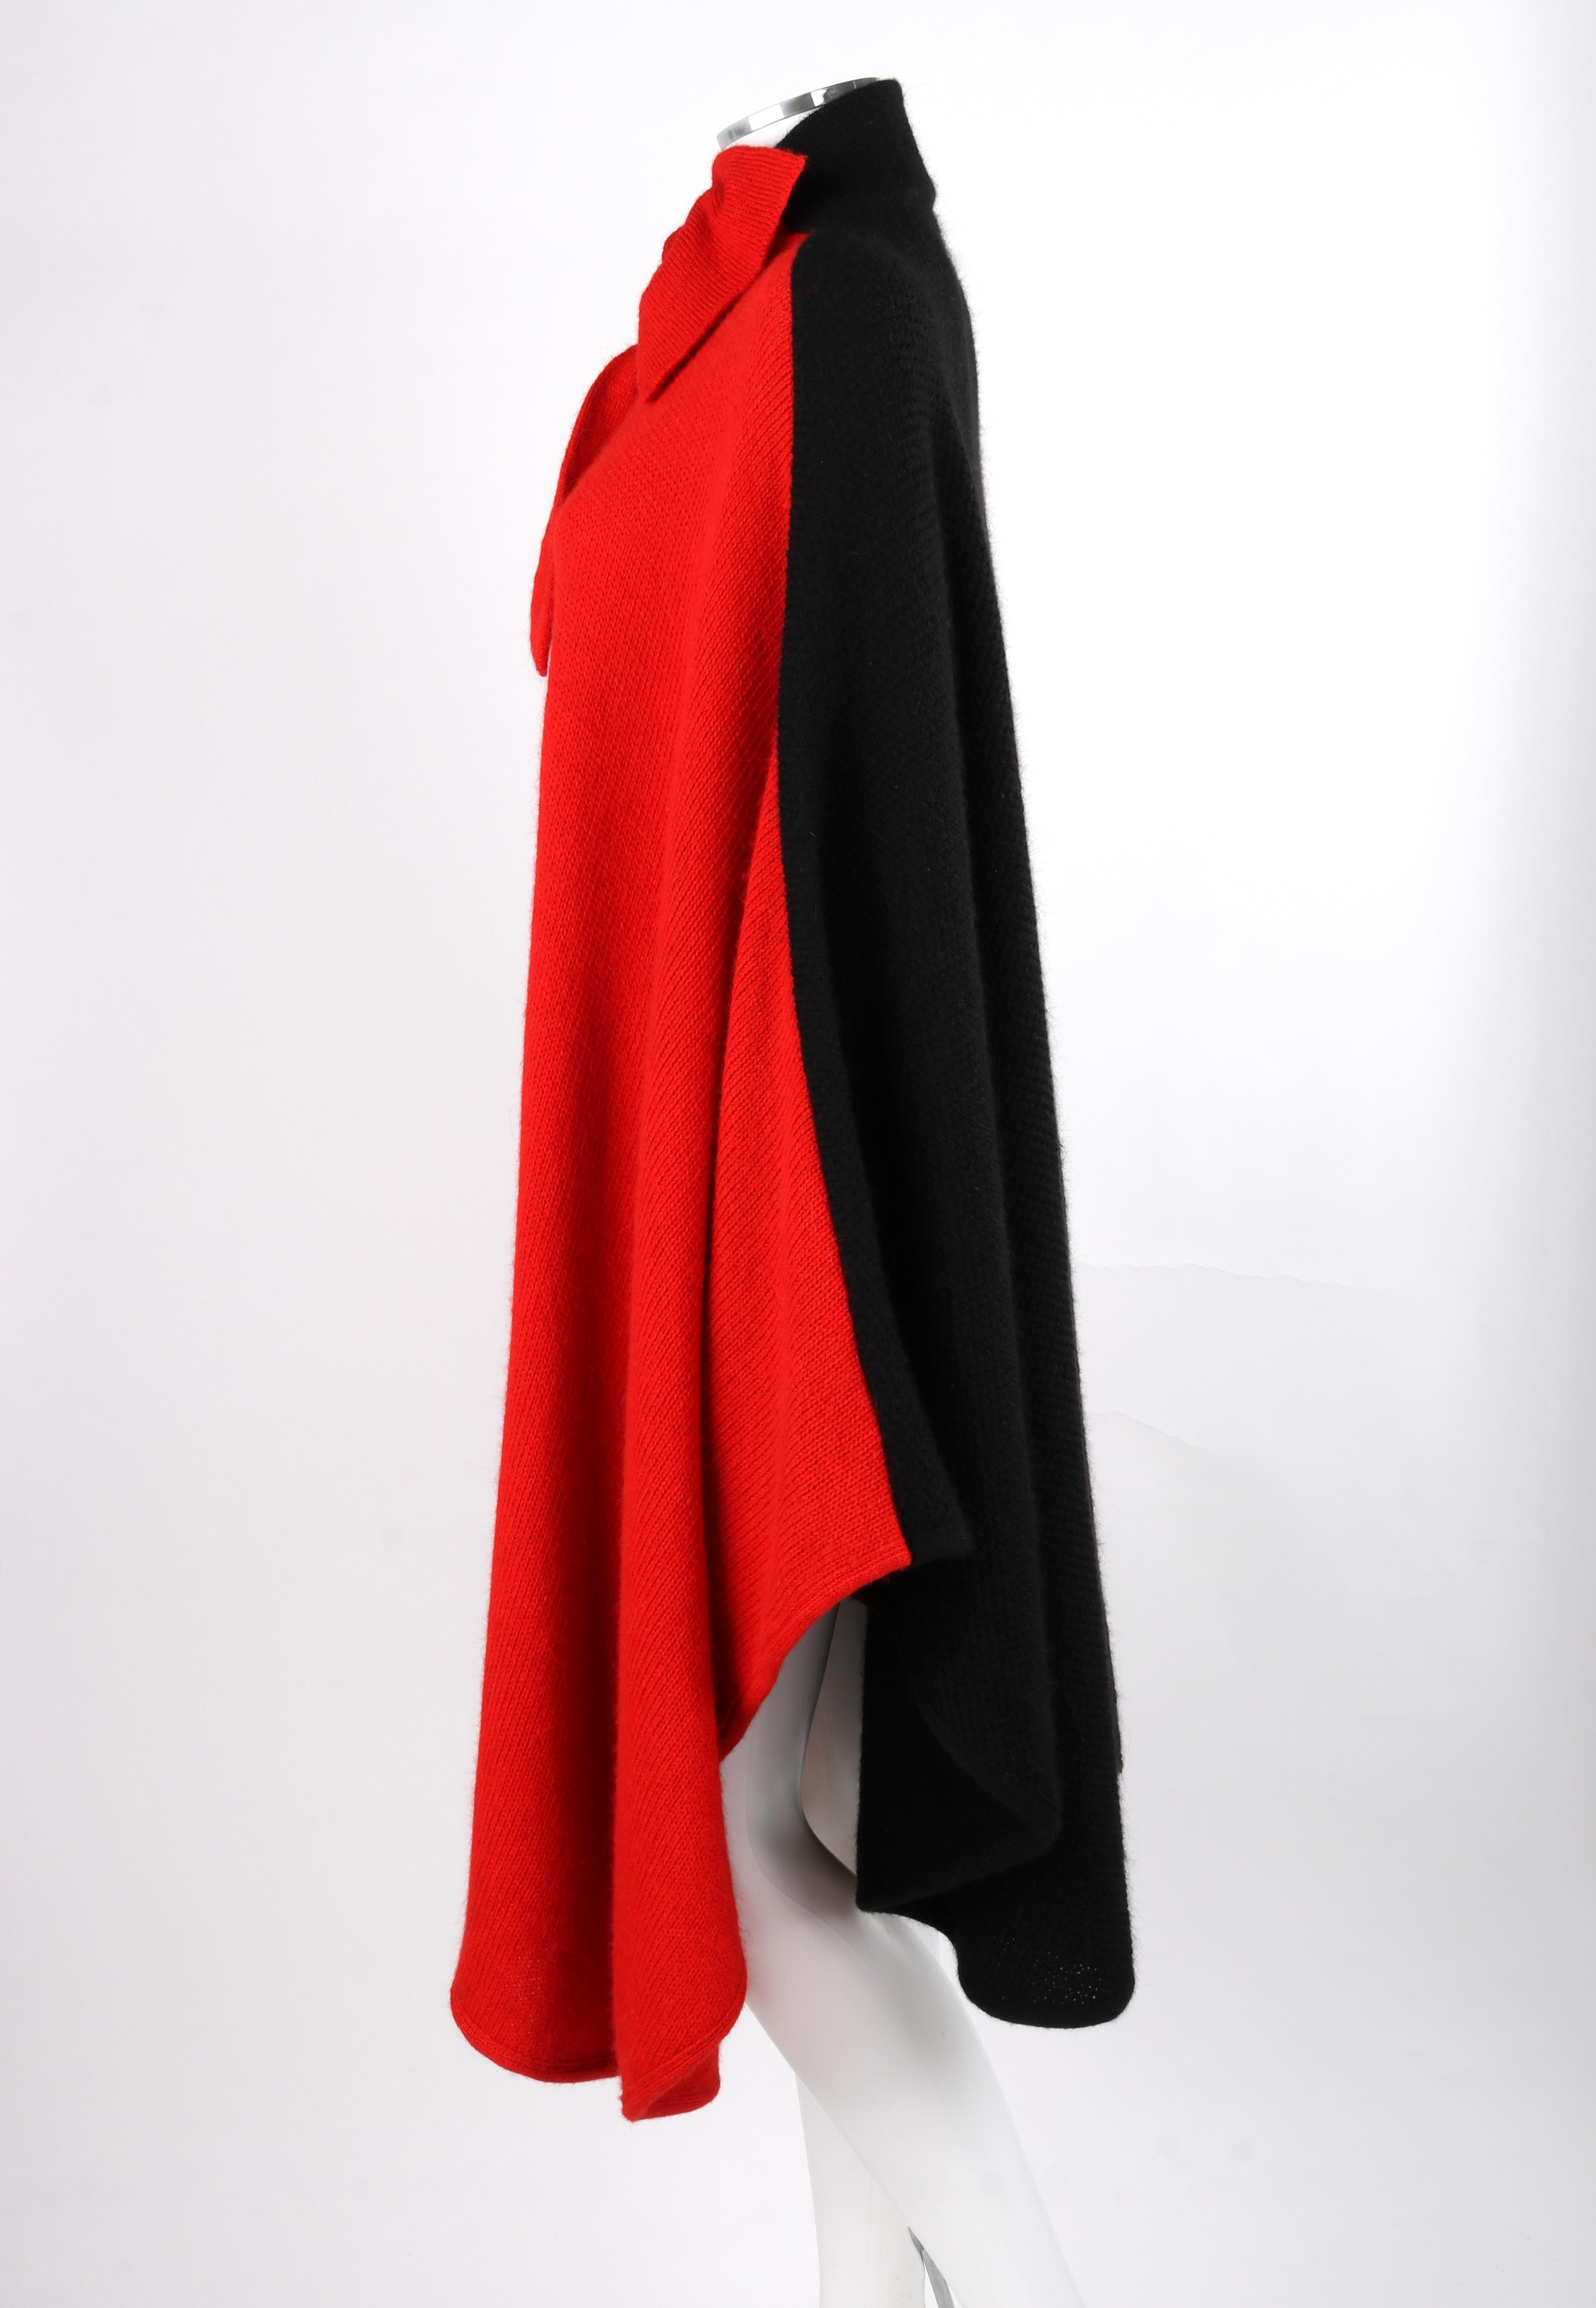 VALENTINO Knitwear c.1980's Vtg Red Black Alpaca Wool Knit Scarf Tie Button Cape For Sale 5